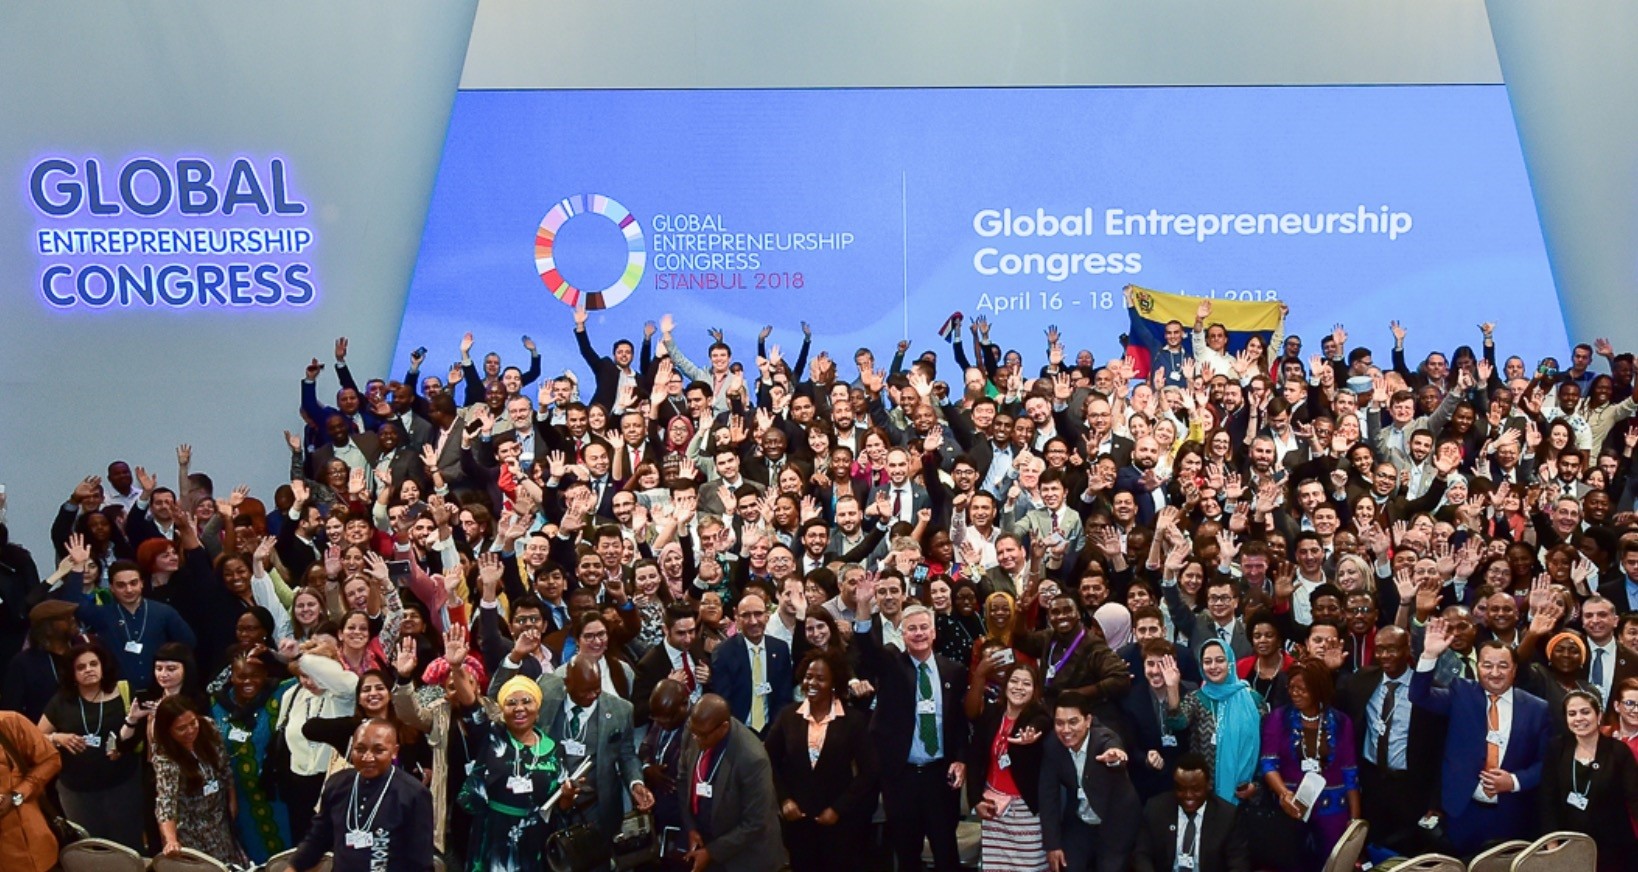 More than 3,000 participants from more than 170 countries were present at  GEC18IST  and more than 150 sessions with the participation of some 300 international speakers were held throughout the four-day event.